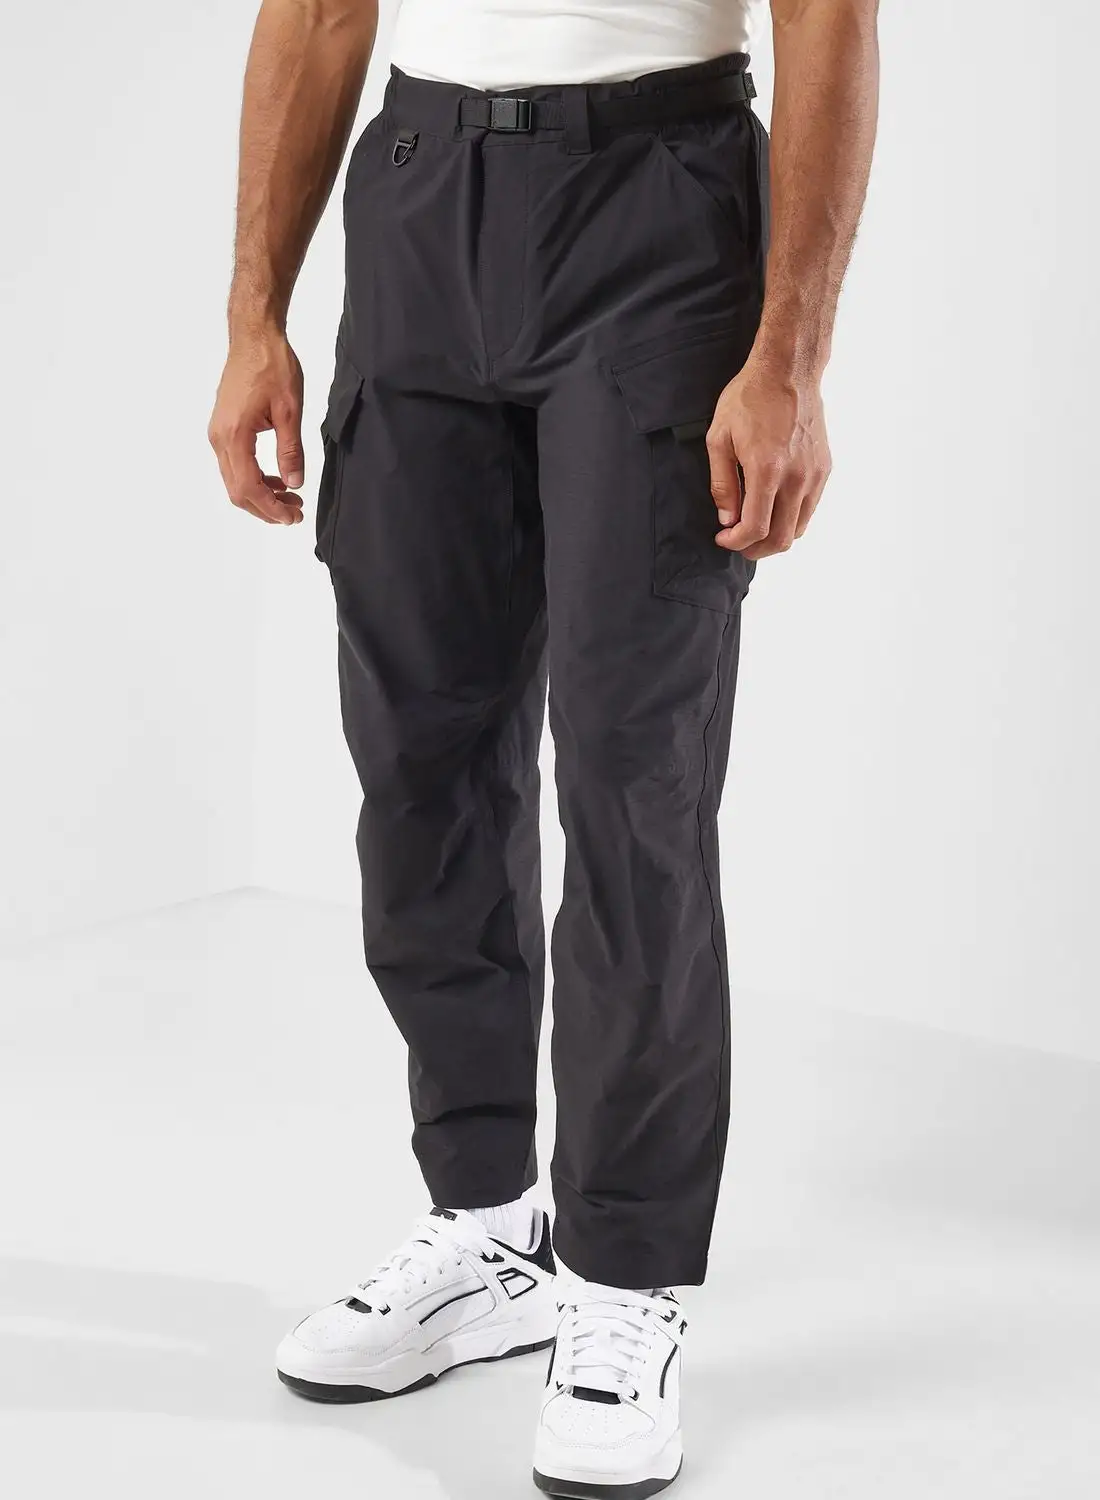 Timberland Quickdry Wind Pants